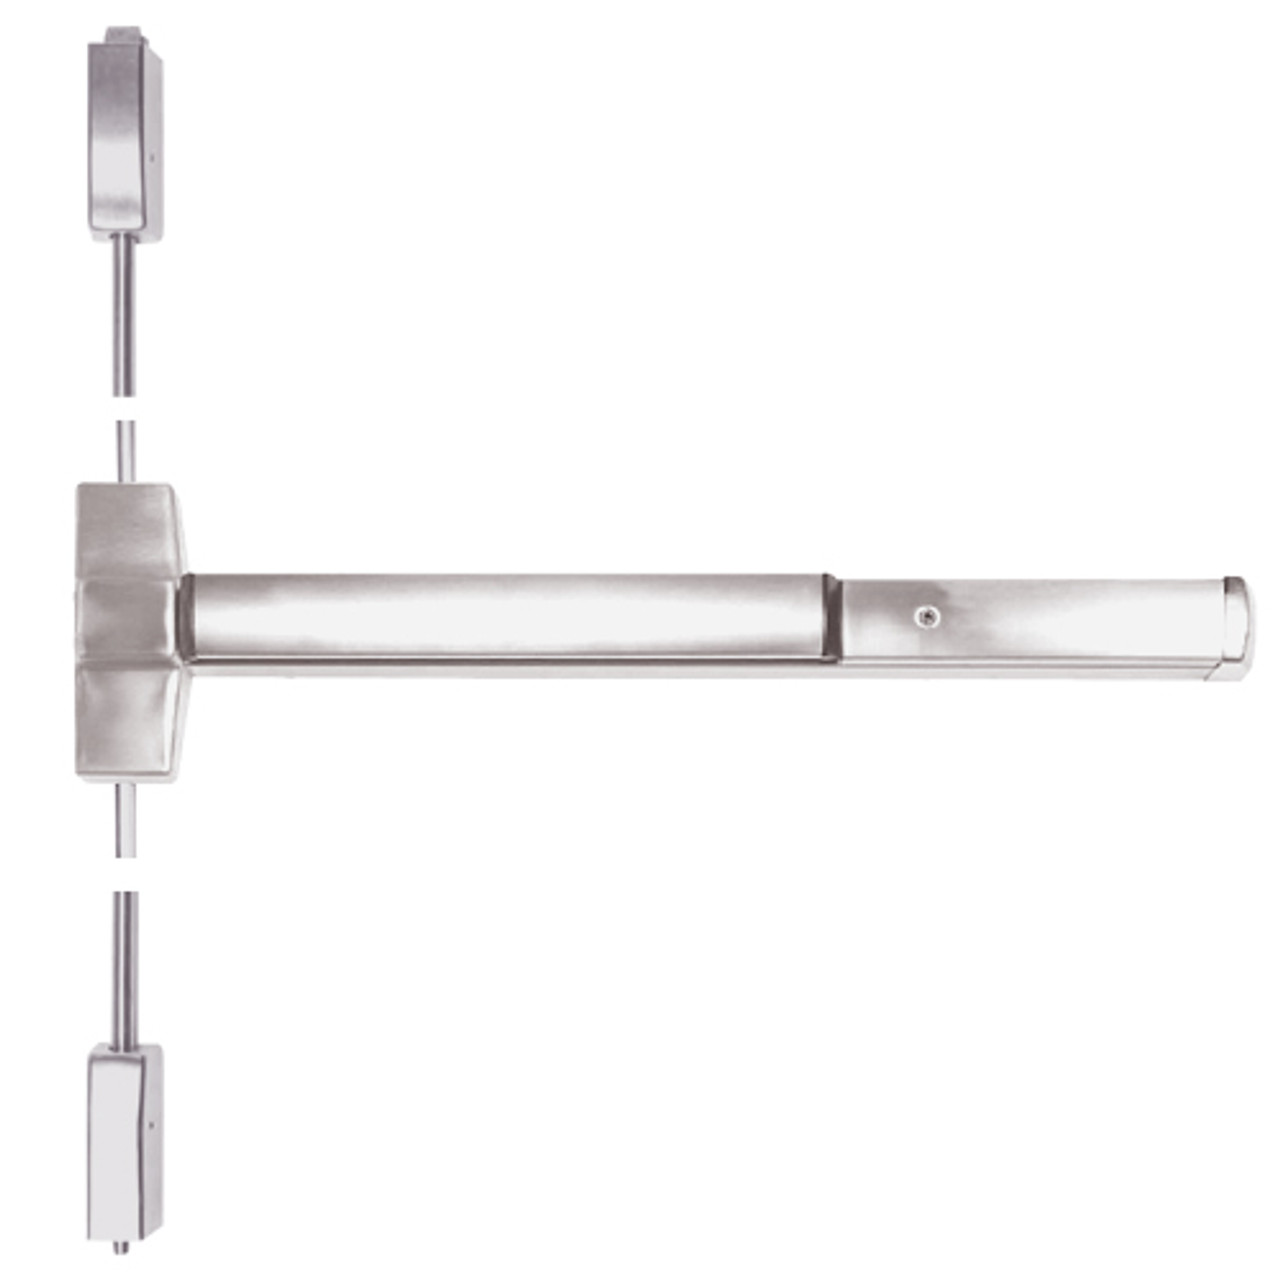 ED5400-630-MELR-M92 Corbin ED5400 Series Non Fire Rated Vertical Rod Exit Device with Motor Latch Retraction and Touchbar Monitoring in Satin Stainless Steel Finish